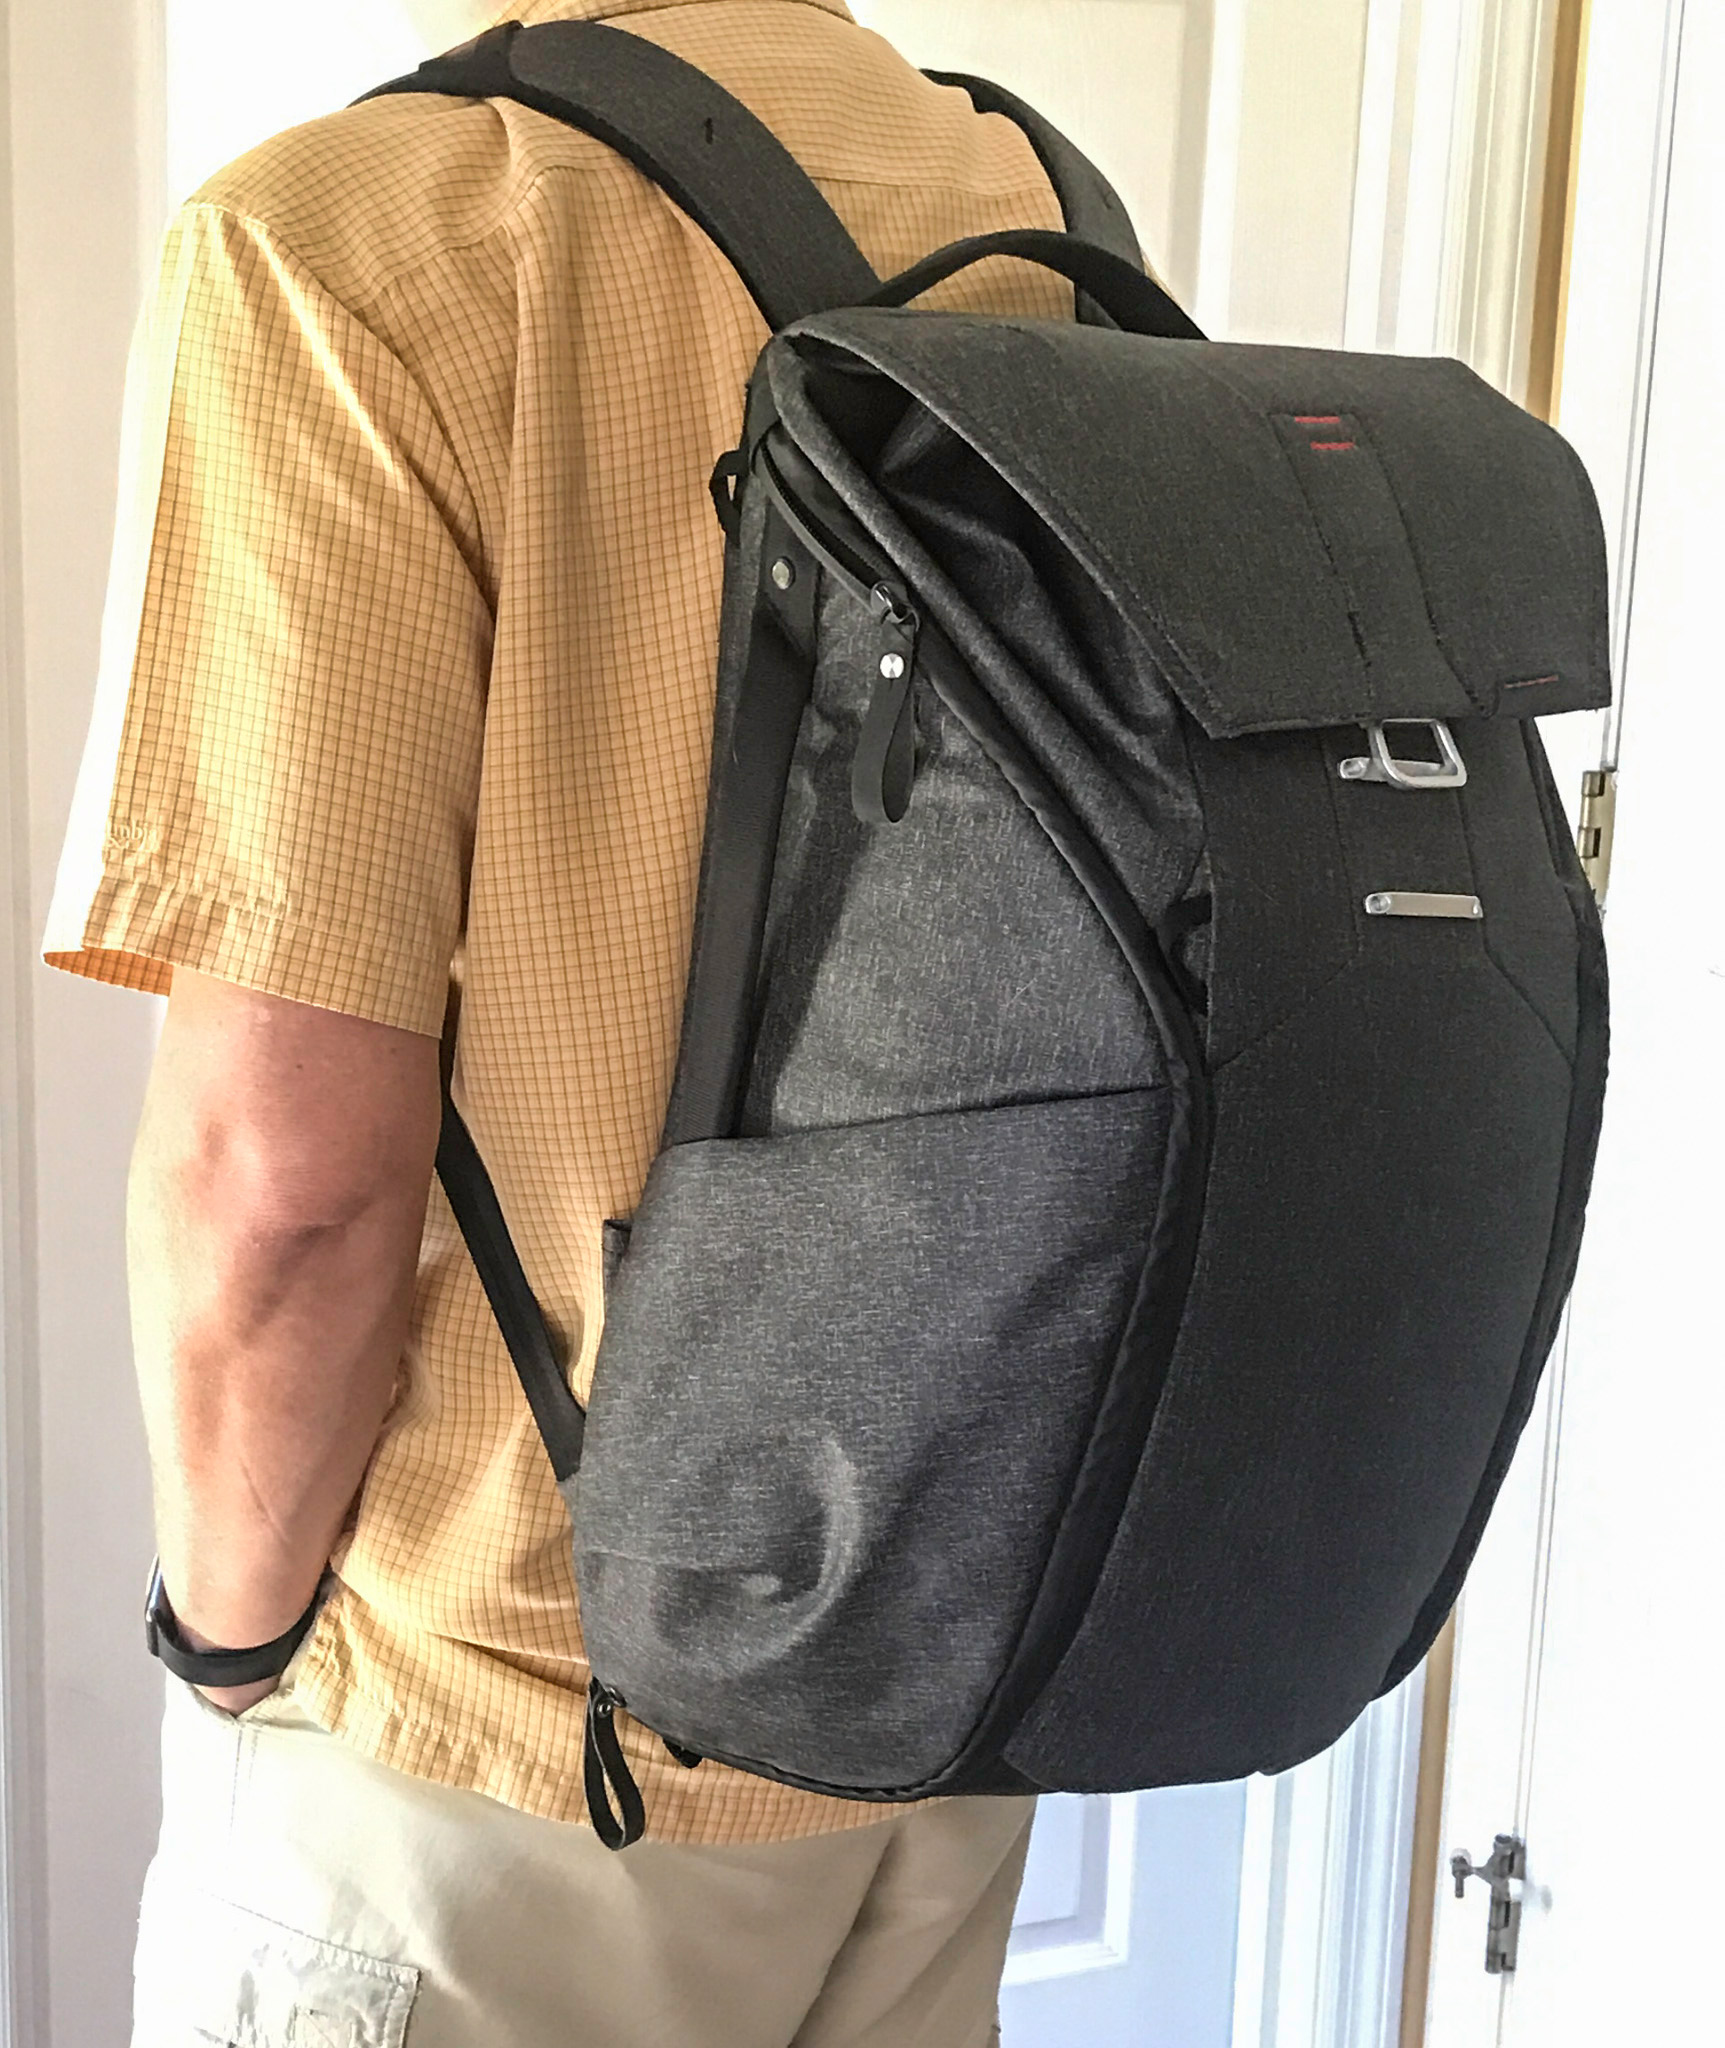 Peak Design Everyday Backpack: Review (part 2) - onStandby